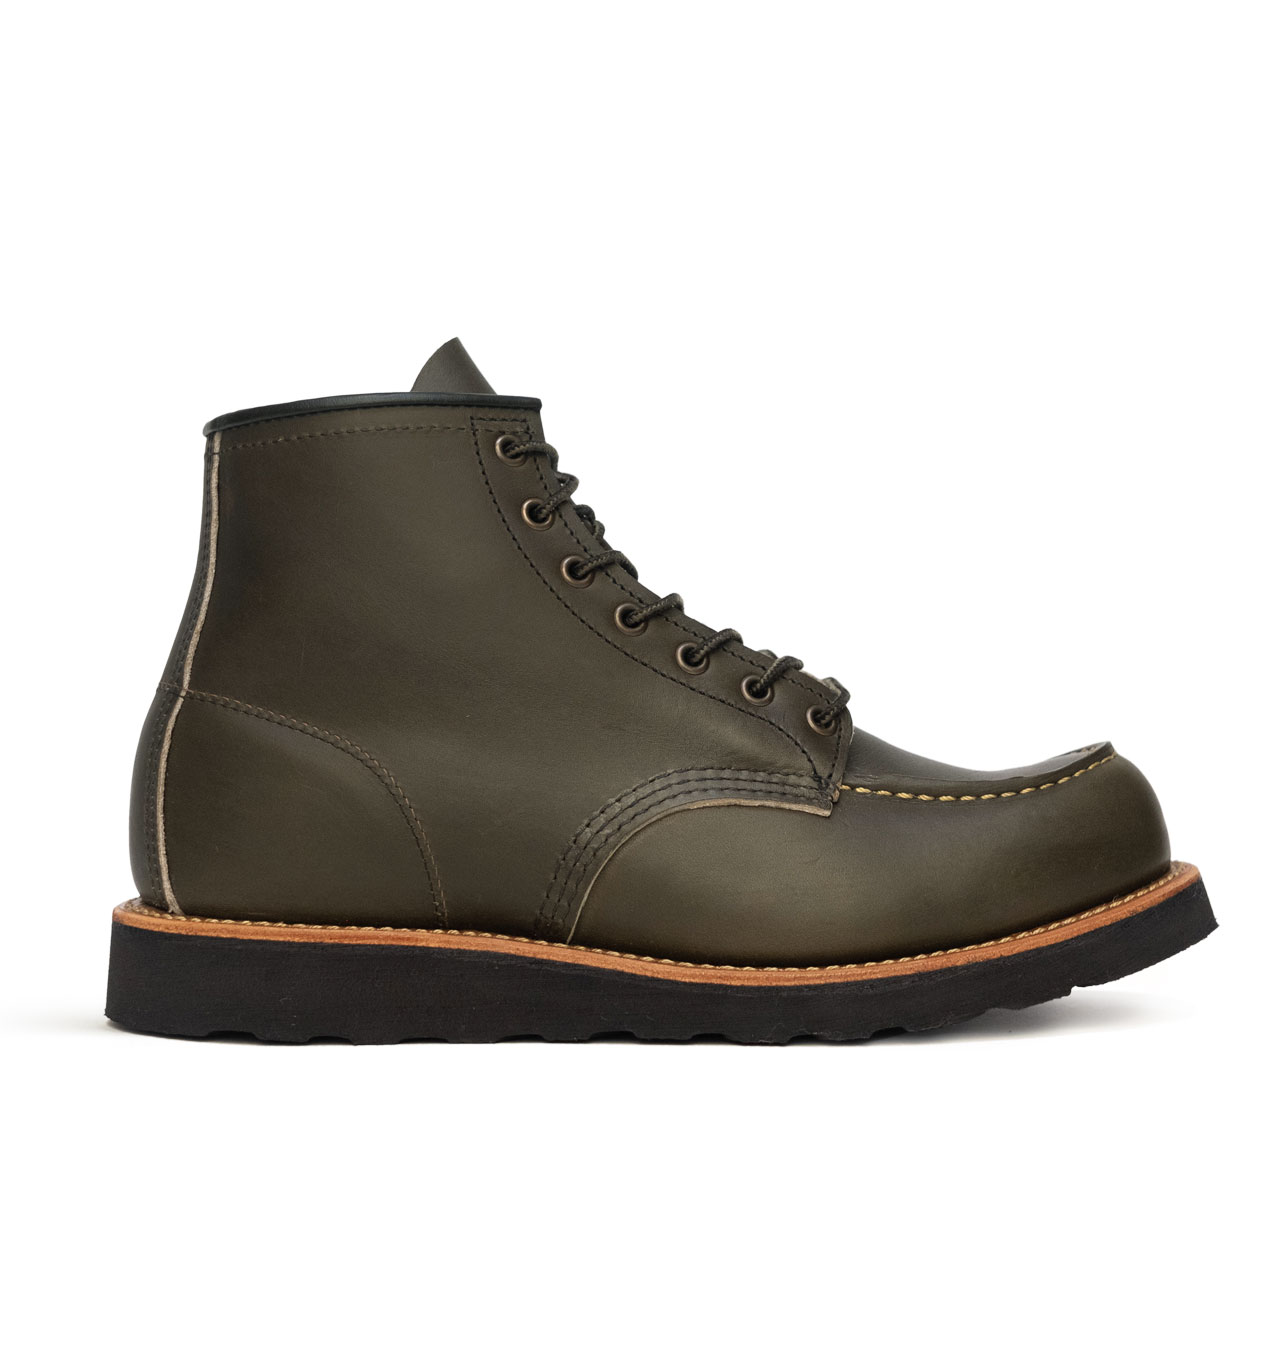 Red Wing Shoes 8828 6-inch Moc Toe - Alpine Portage Leather LIMITED